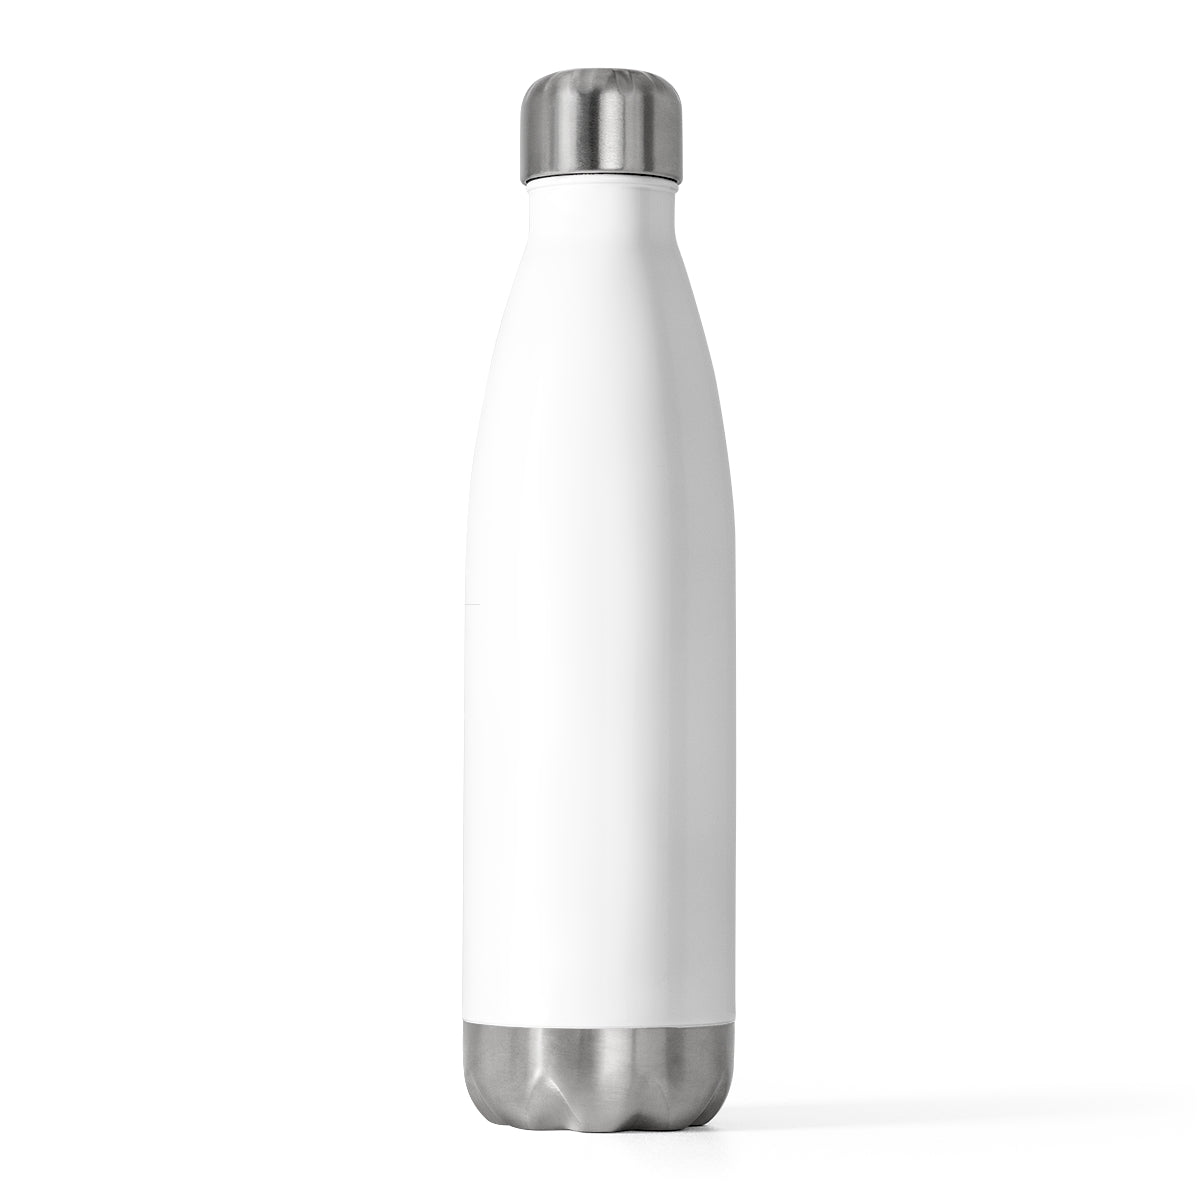 I Am the Nobody The Nobody the World Saw But The One He Knew Was Worth Dying For Insulated Bottle Printify